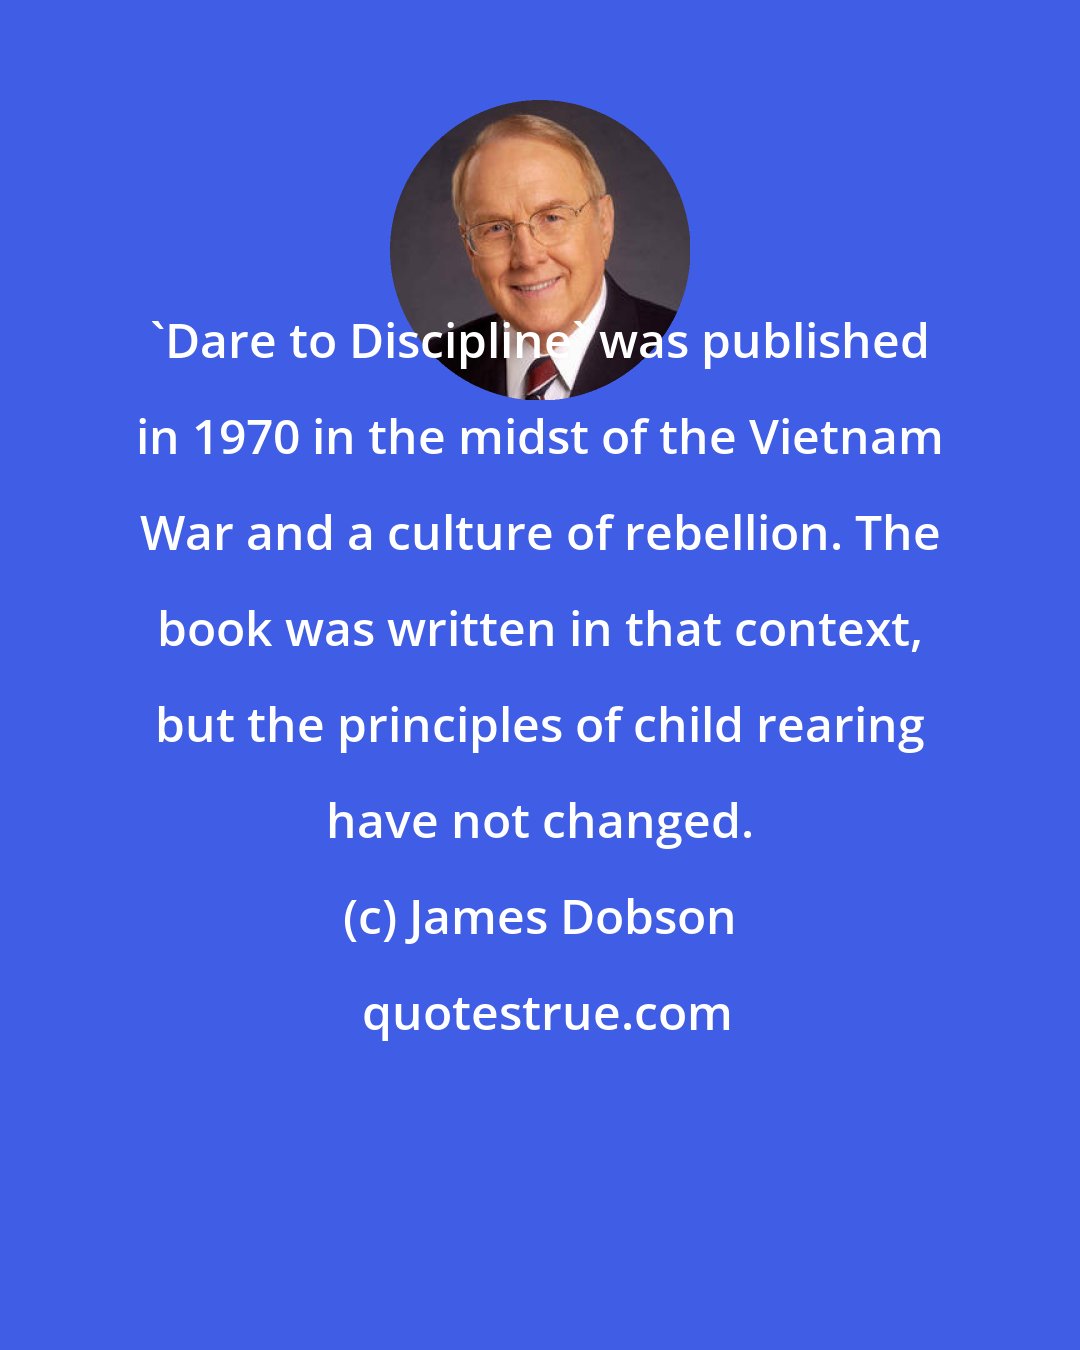 James Dobson: 'Dare to Discipline' was published in 1970 in the midst of the Vietnam War and a culture of rebellion. The book was written in that context, but the principles of child rearing have not changed.